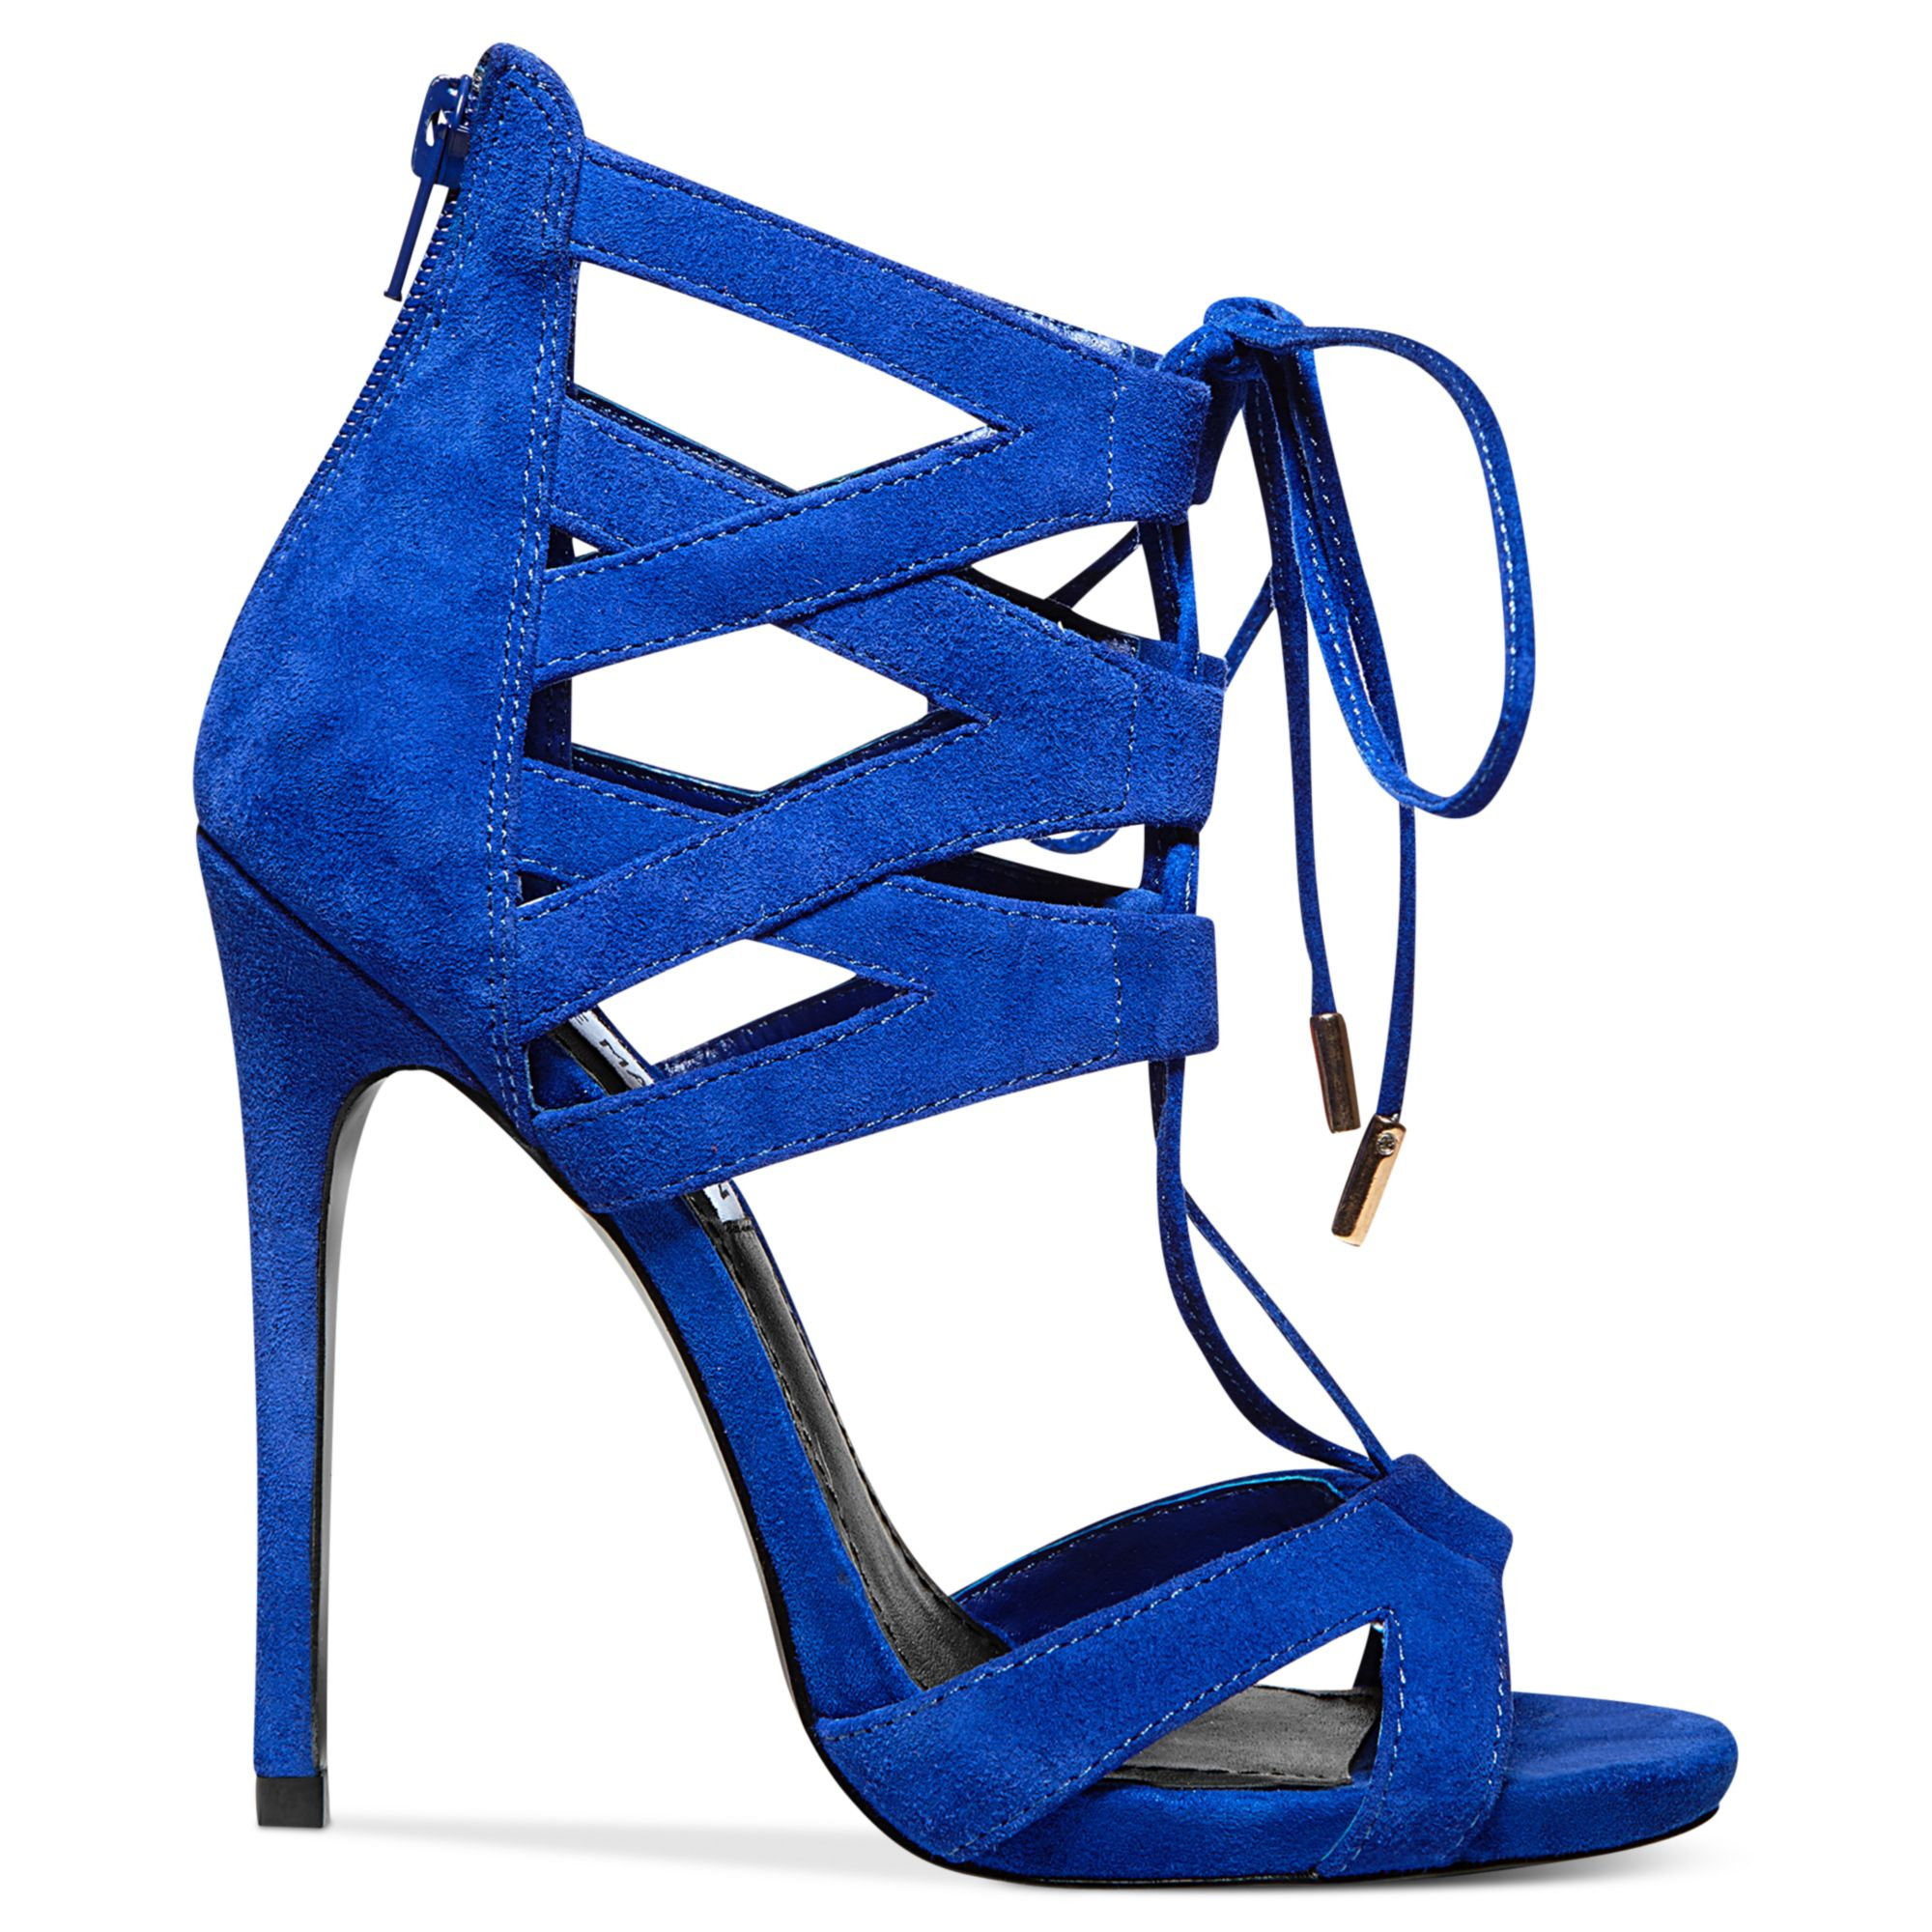 Lyst - Steve Madden Womens Maiden Lace Up Sandals in Blue